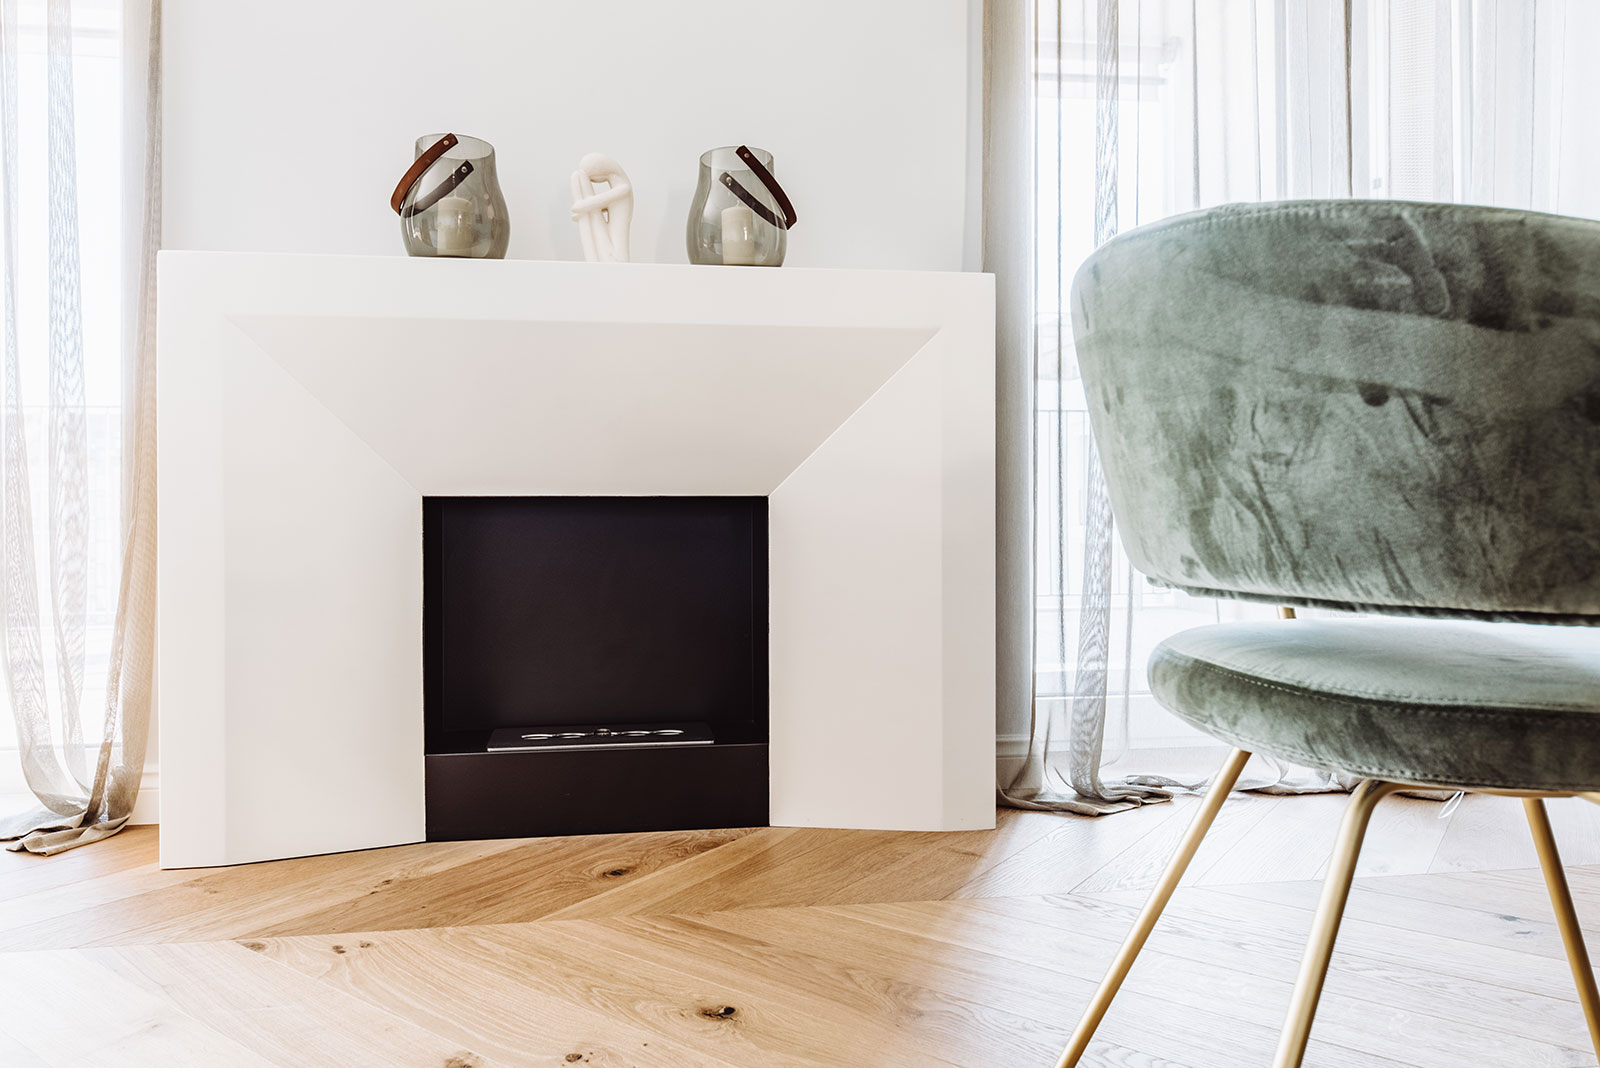 Design by Matteo Italia. Freestanding or recessed bioethanol fireplace made in Italy. Modern reinterpretation of Lewis XVI style fireplaces. Free delivery.